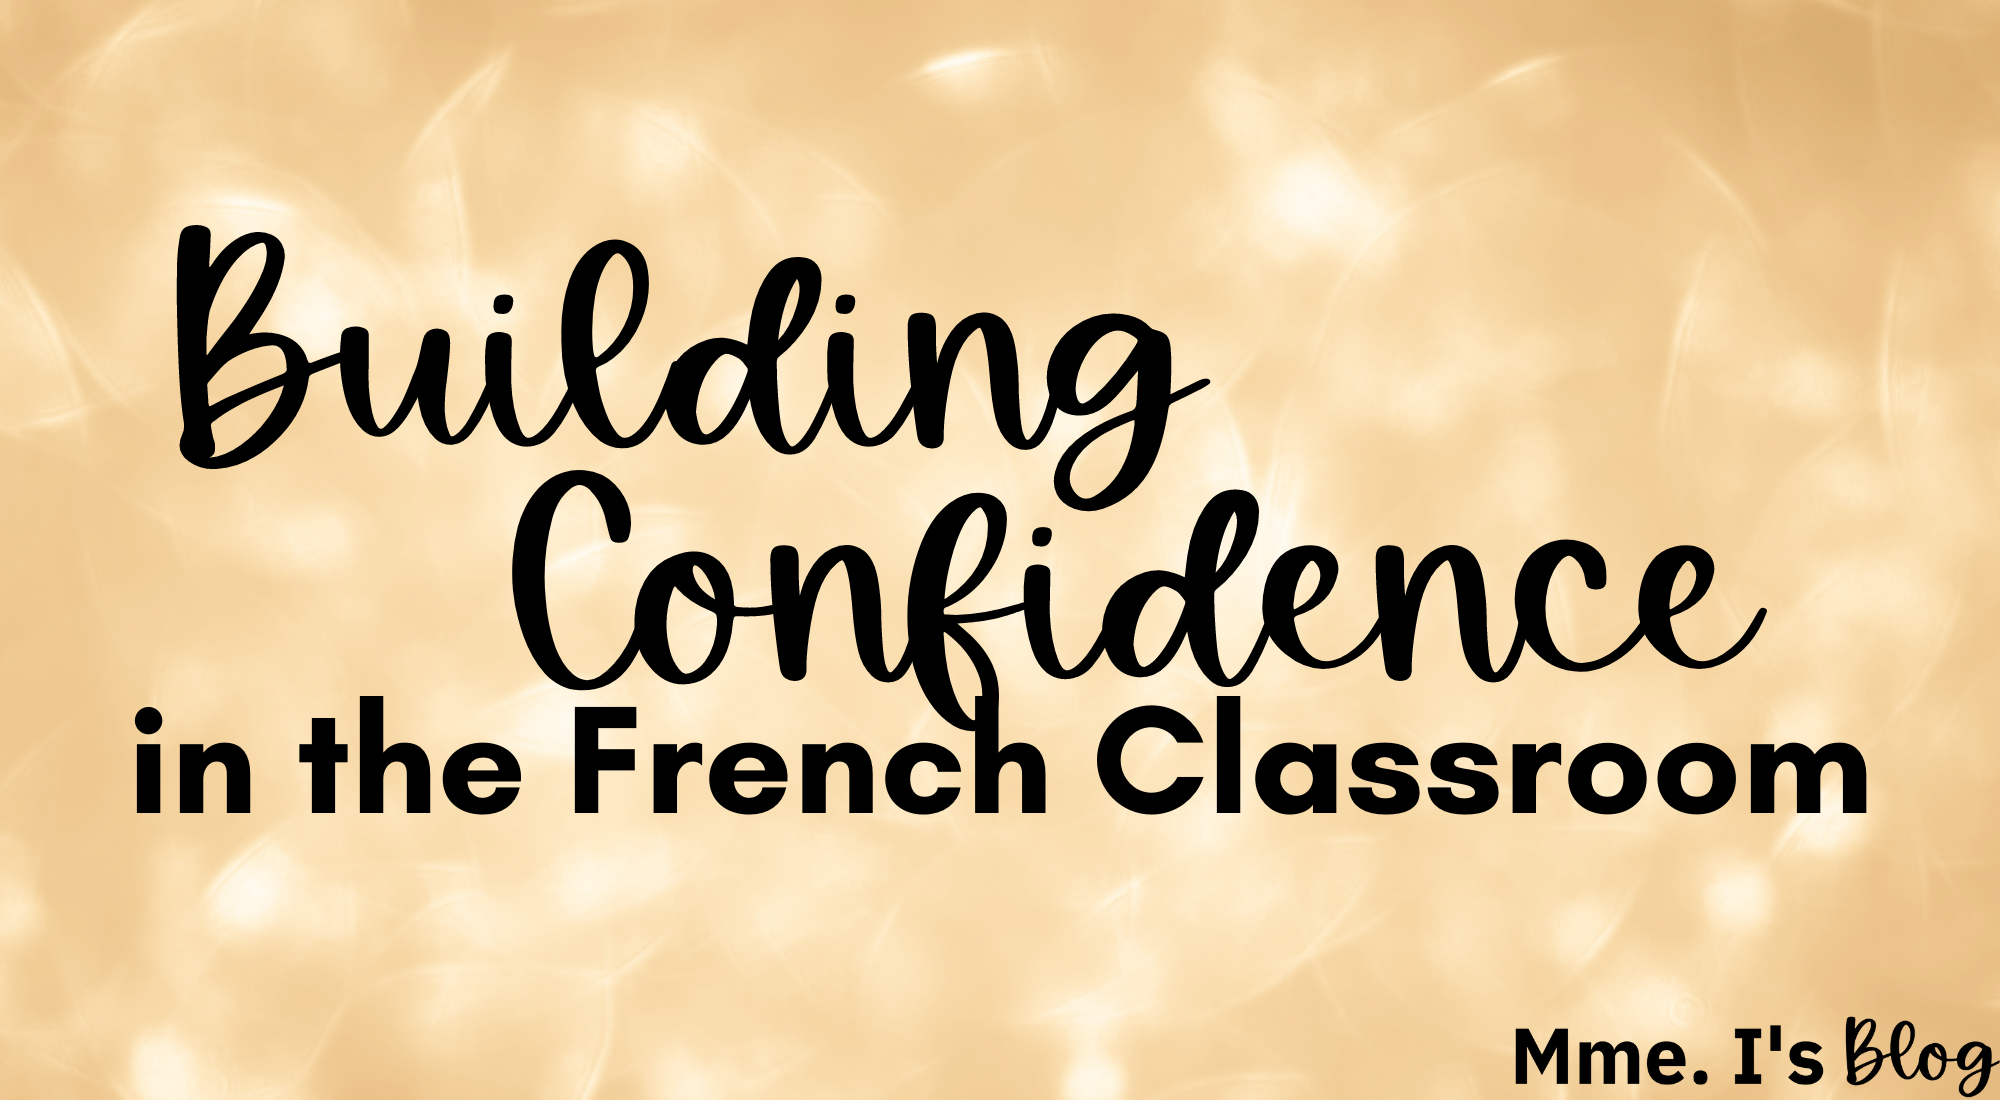 Building Confidence in the French Classroom